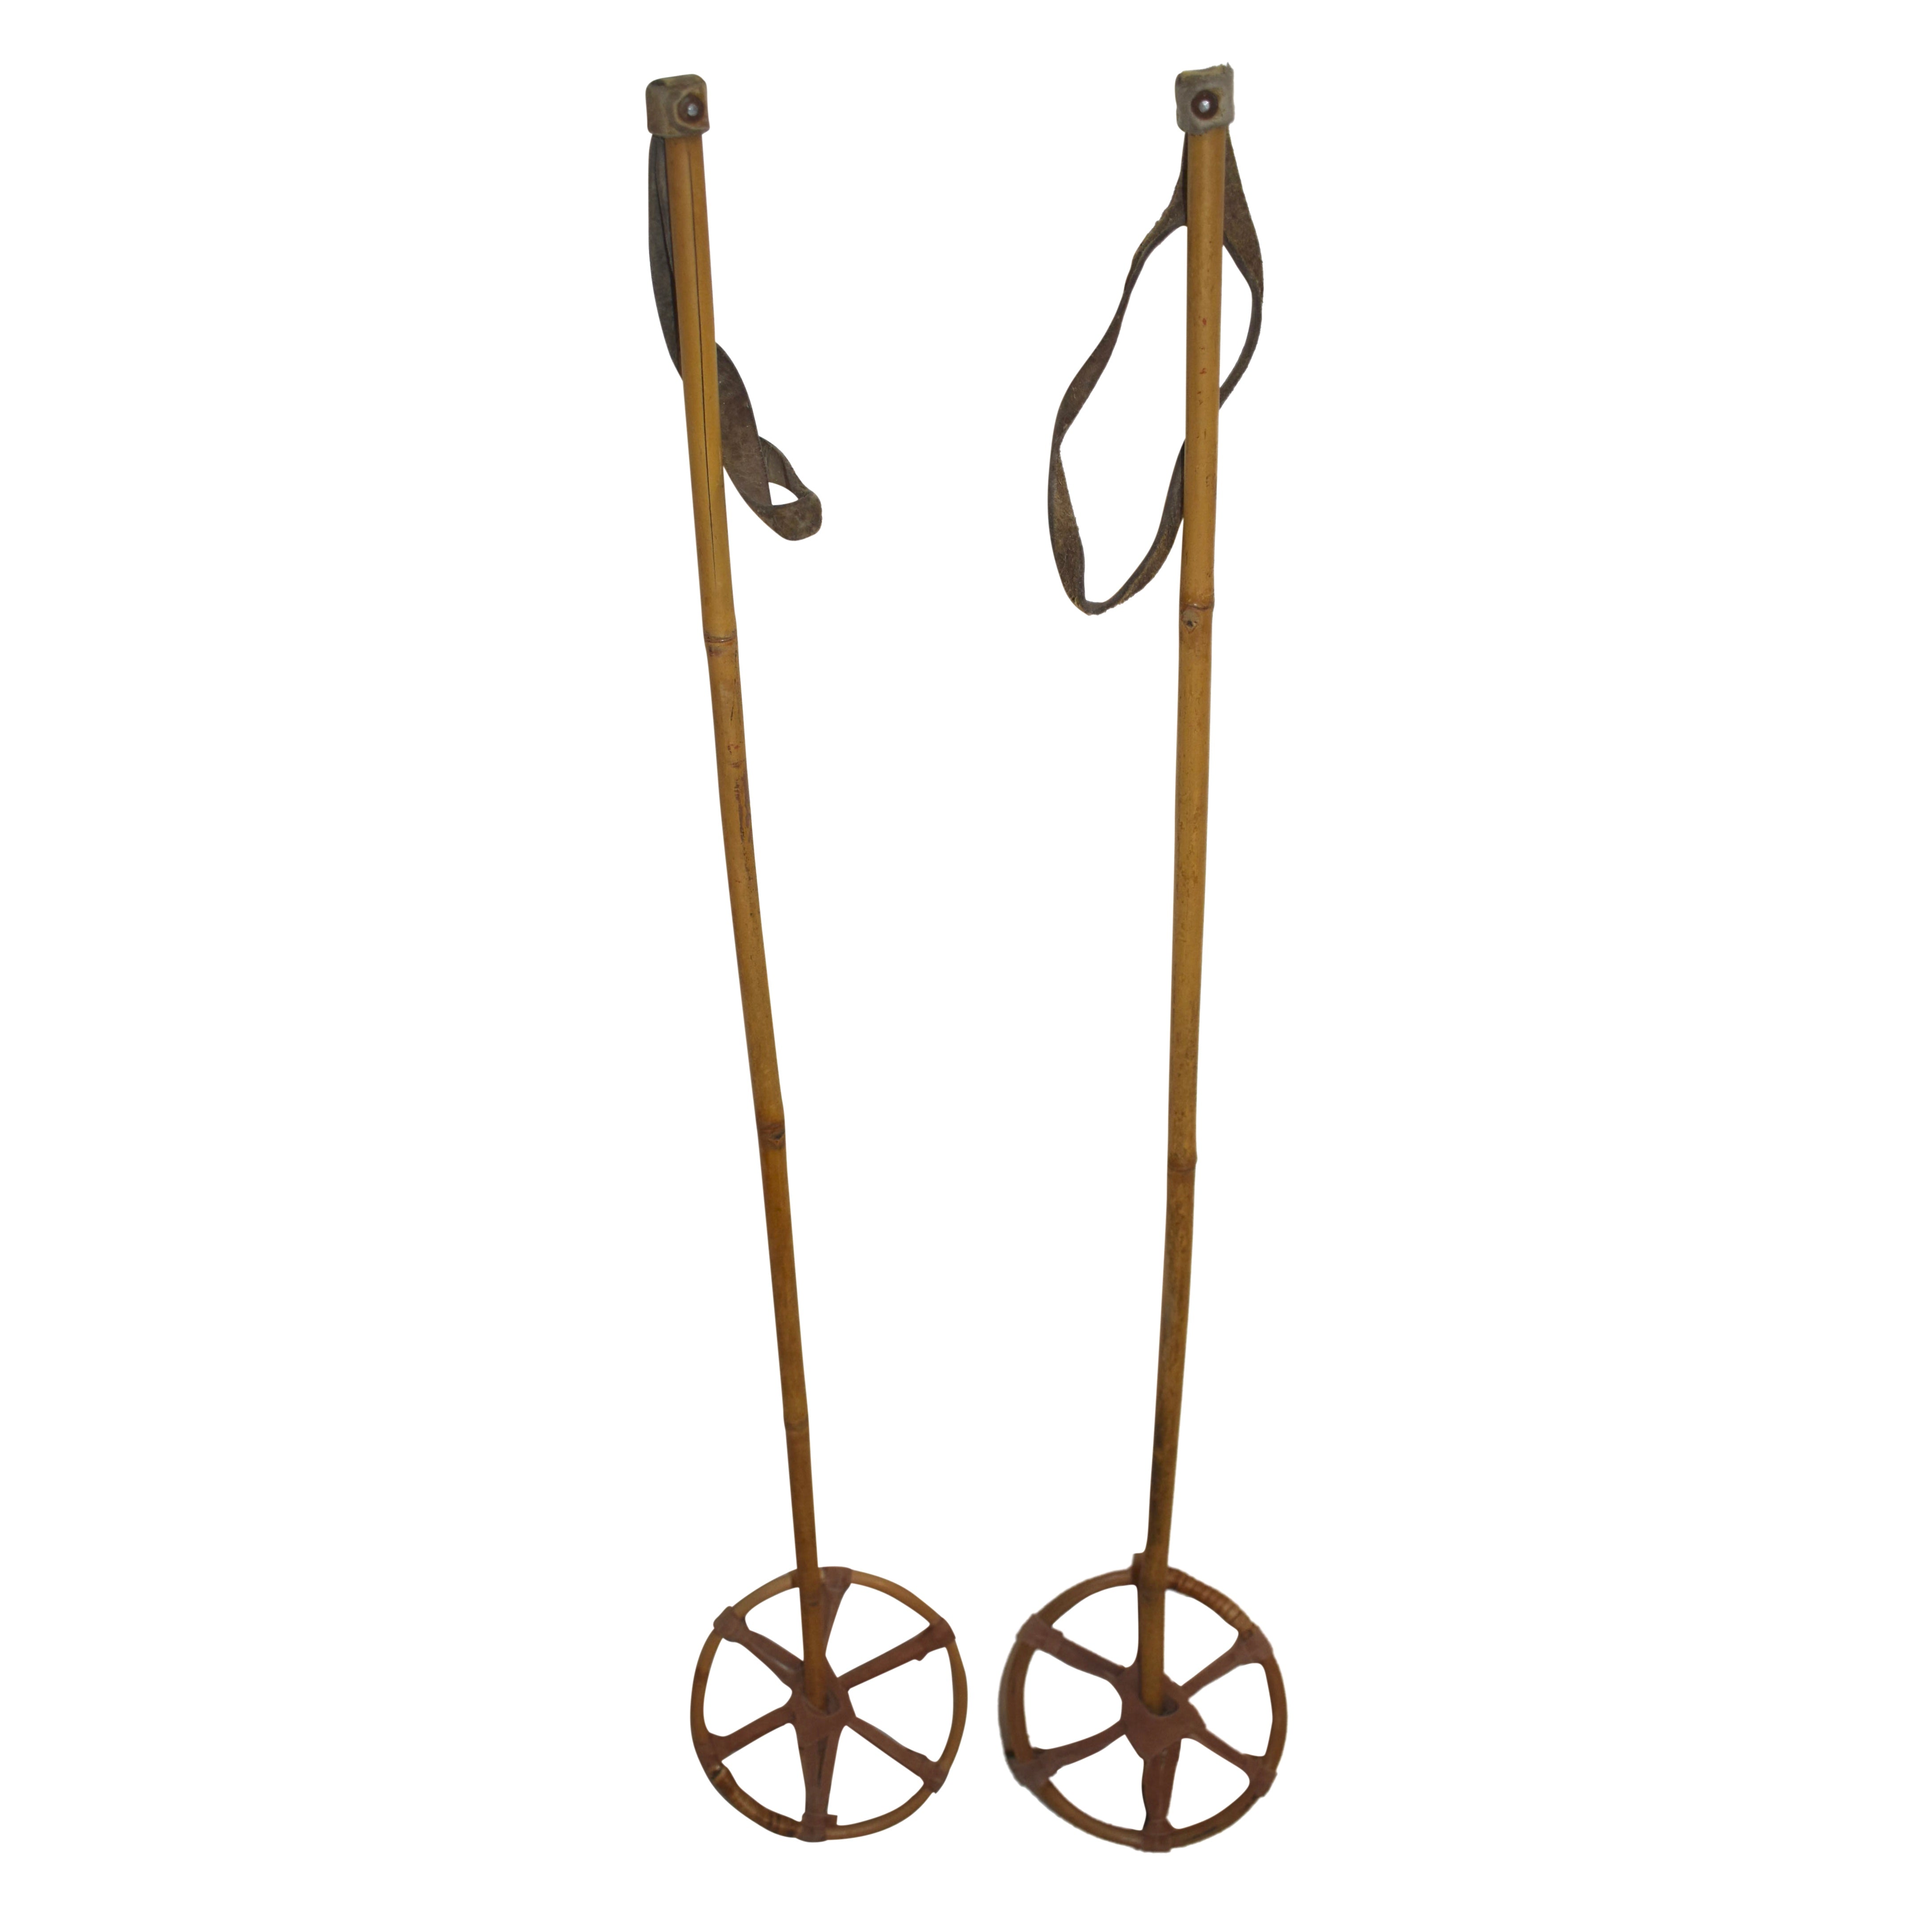 Child's Bamboo Ski Poles with Leather Straps